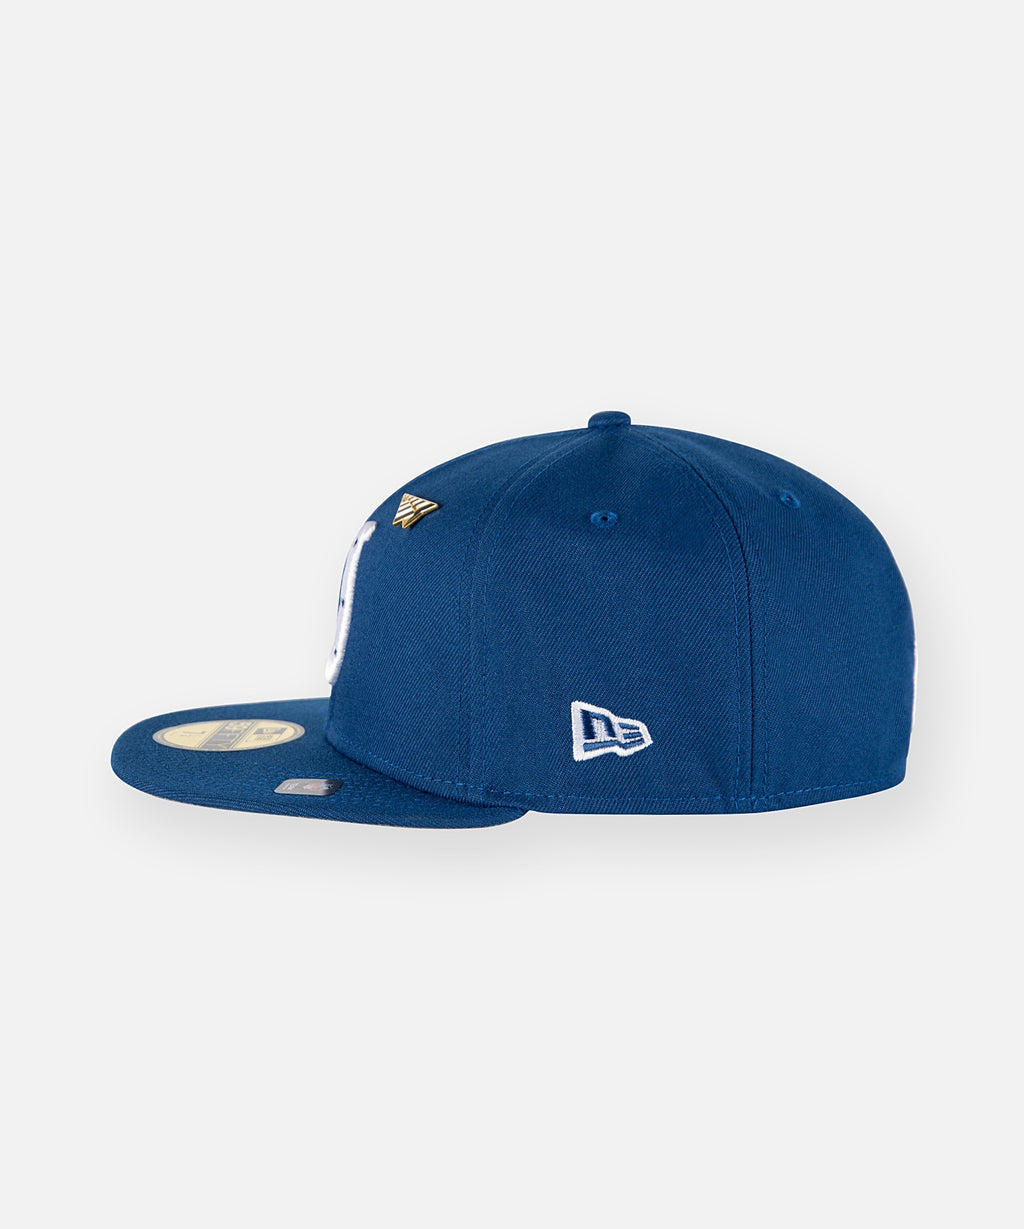 Paper Planes X Indianapolis Colts Team Color 59Fifty Fitted Hat_For Men_4